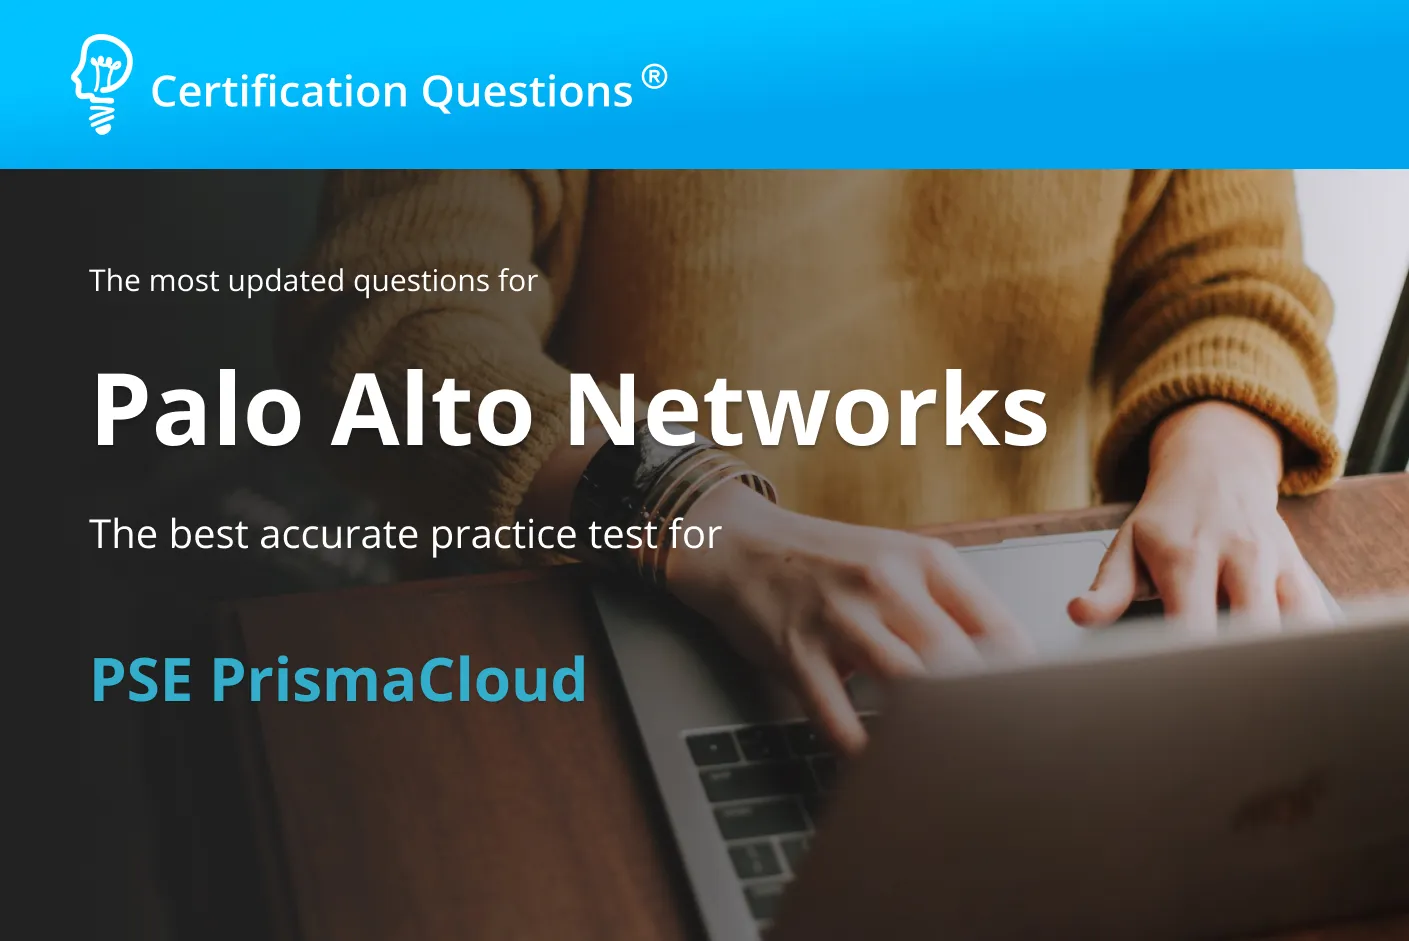 This image is related to the study guide of the palo alto networks ase certification questions.